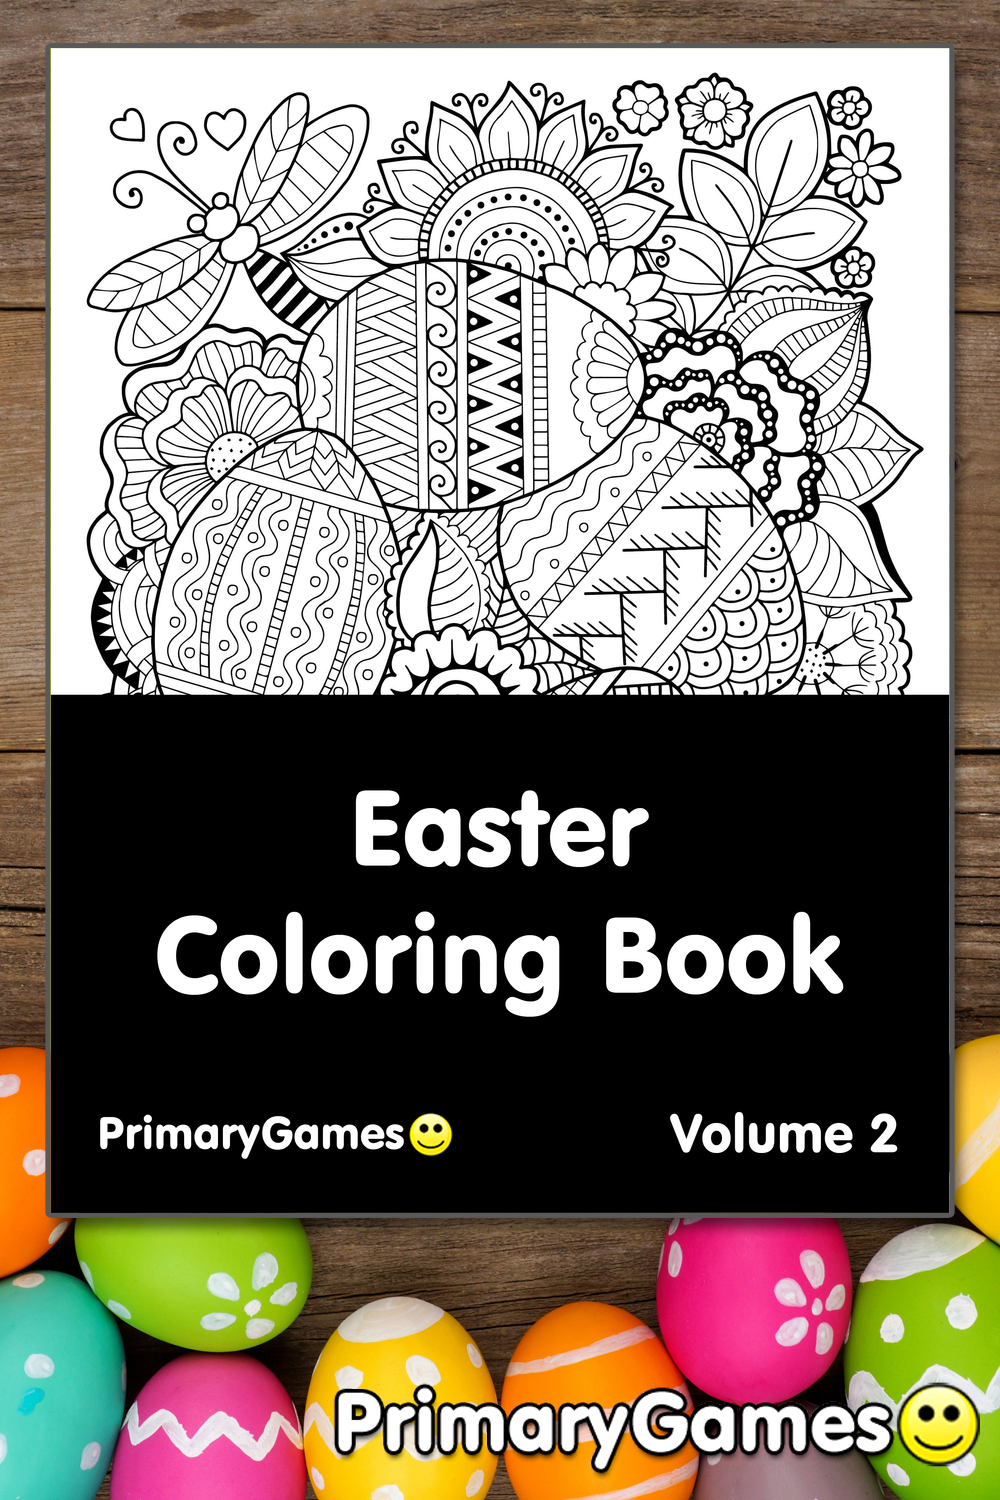 Easter Coloring eBook Volume 2 • FREE Printable PDF from PrimaryGames